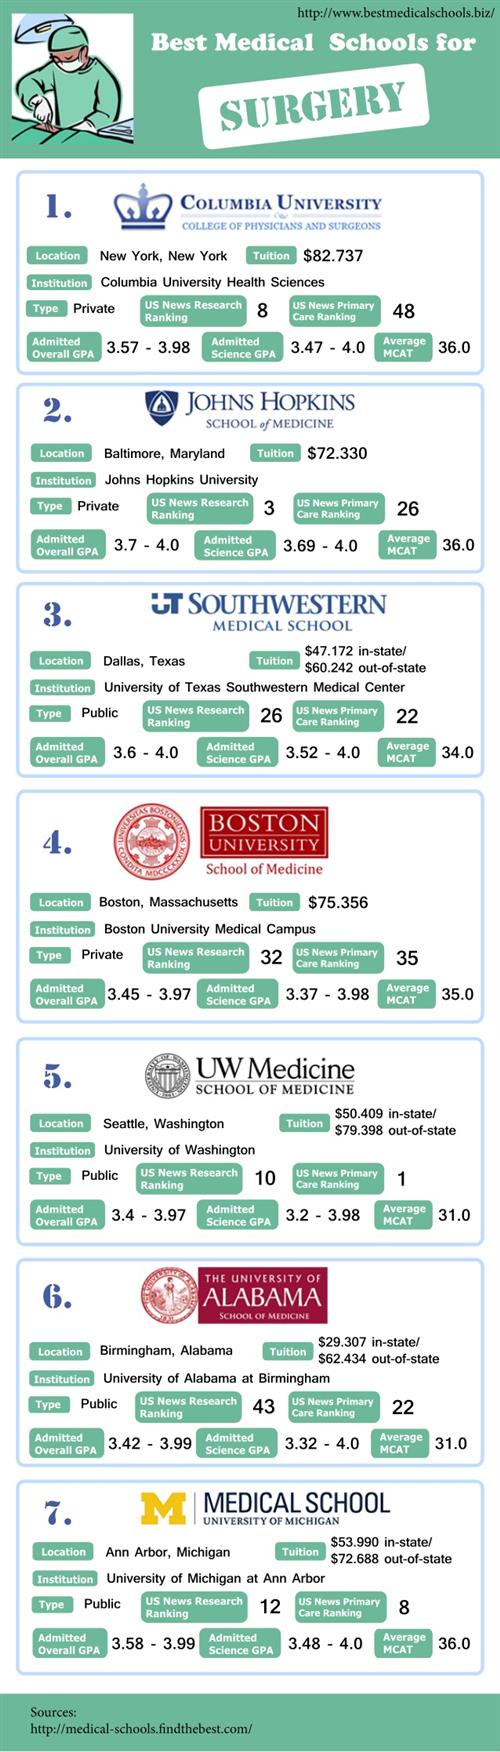 Best Medical Schools for Surgery 